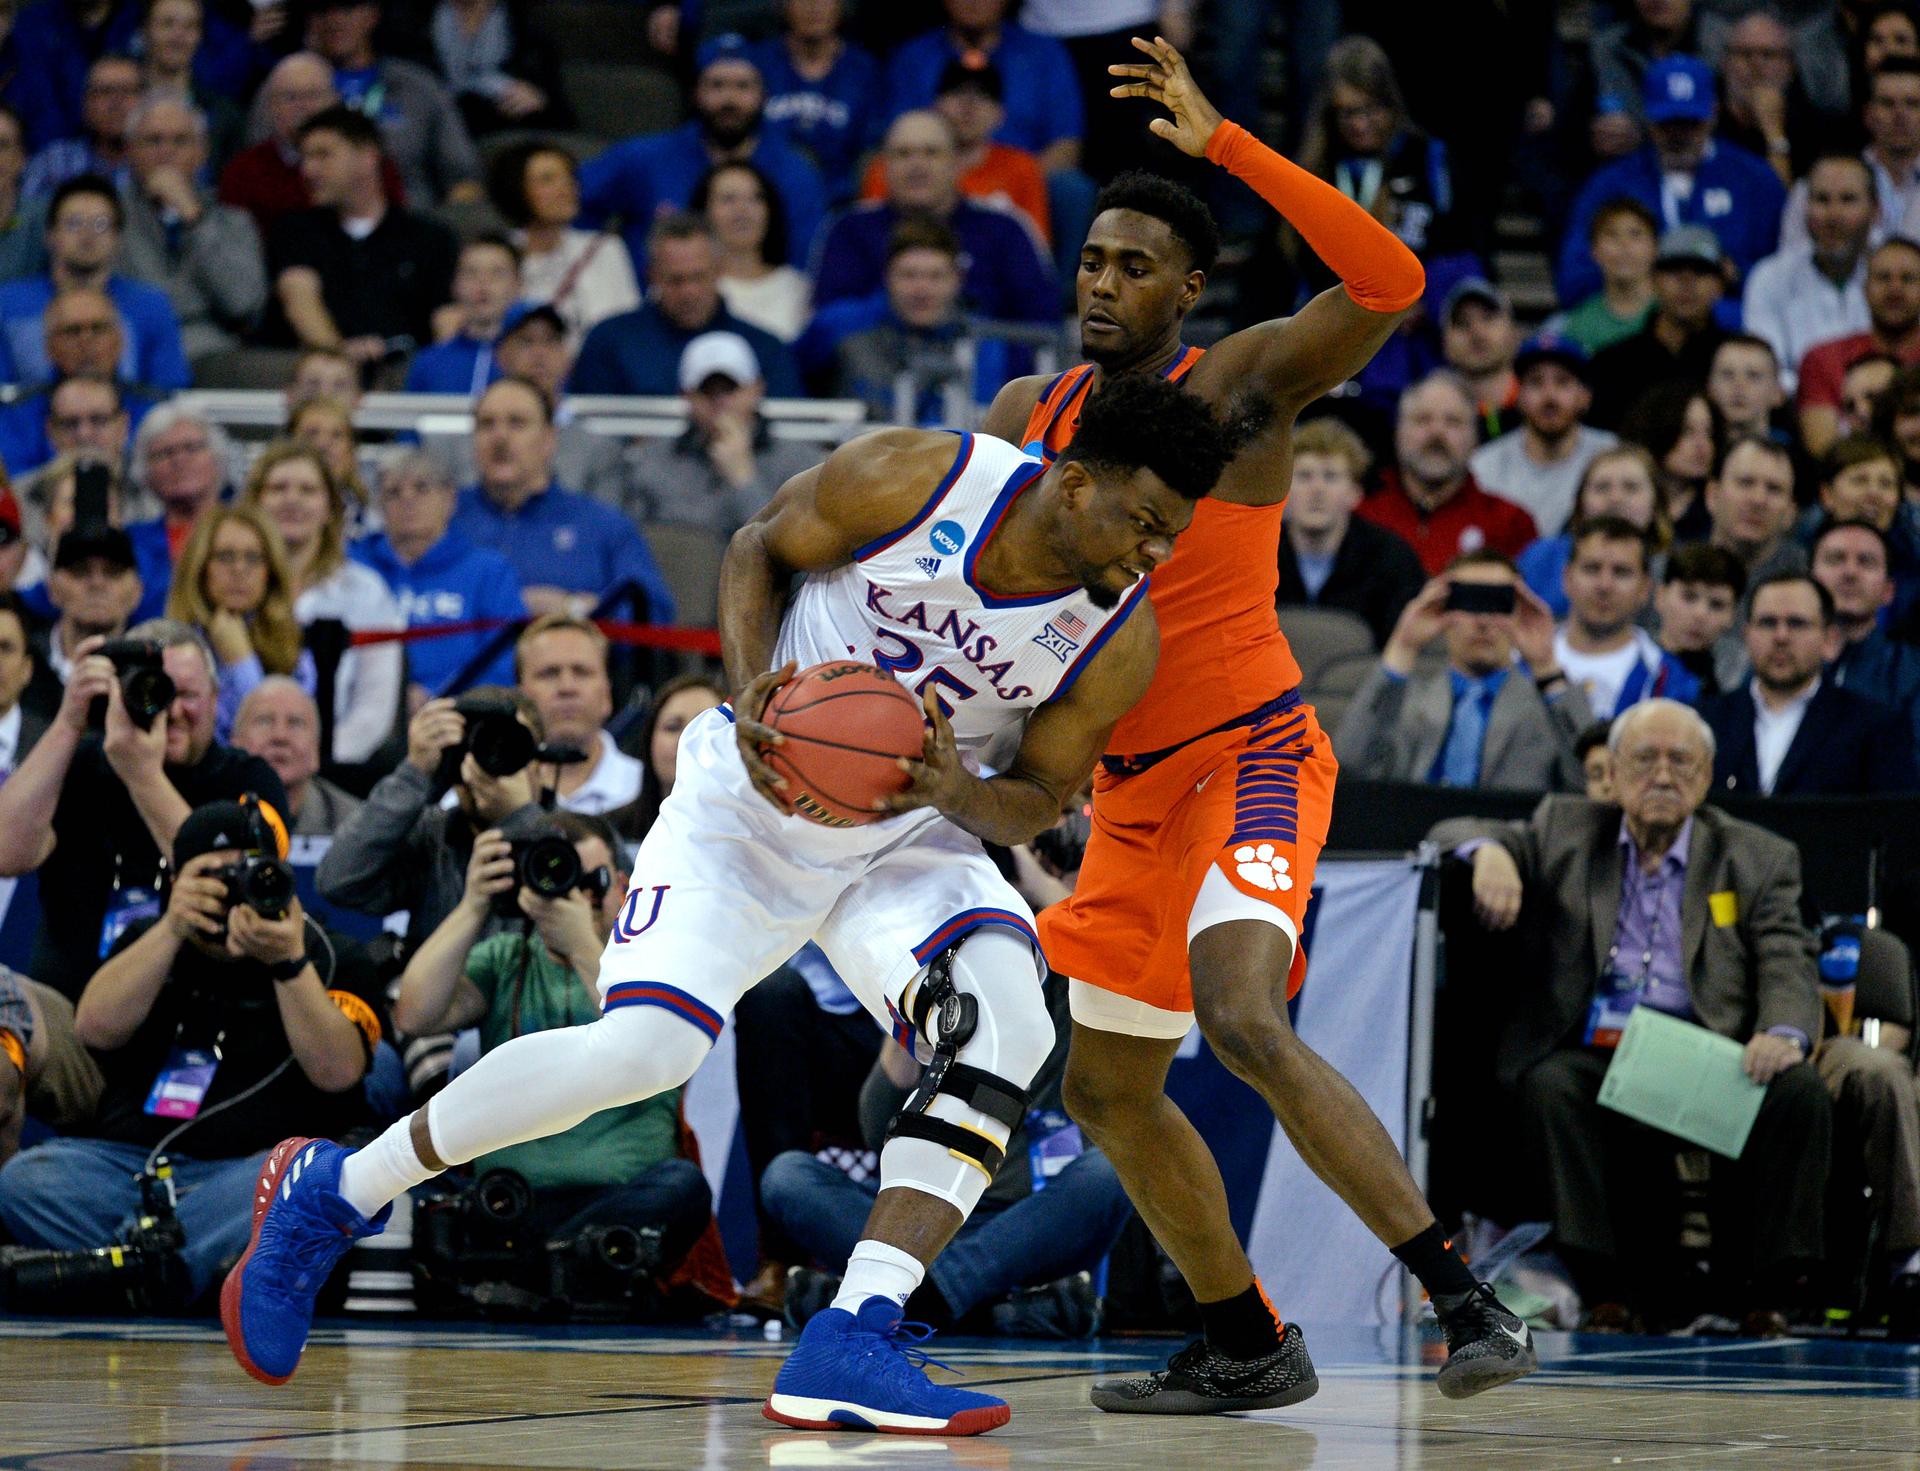 Kansas Jayhawks center Udoka Azubuike drives to the basket against Clemson Tigers forward Elijah Thomas during the first half in the semifinals of the Midwest regional of the 2018 NCAA Tournament.